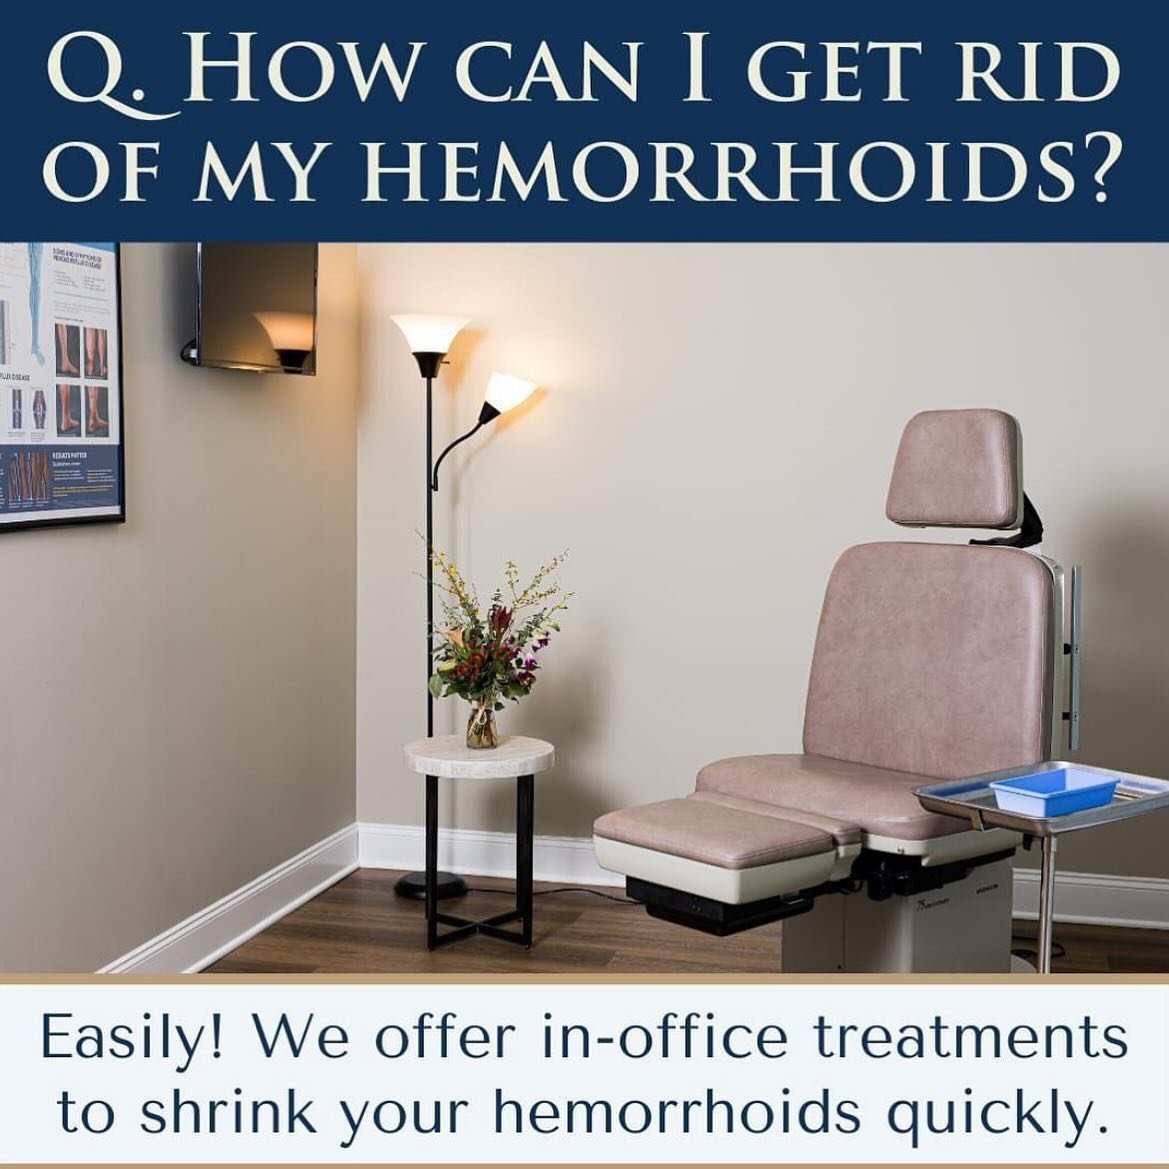 How Can I Get Rid of My Hemorrhoids?✨
Simple! Just request an appointment in any of our 4 convenient locations on www.VeinInstitute.com and our talented providers can help you!

To learn more about our Hemorrhoid treatments visit:
https://veininstitu